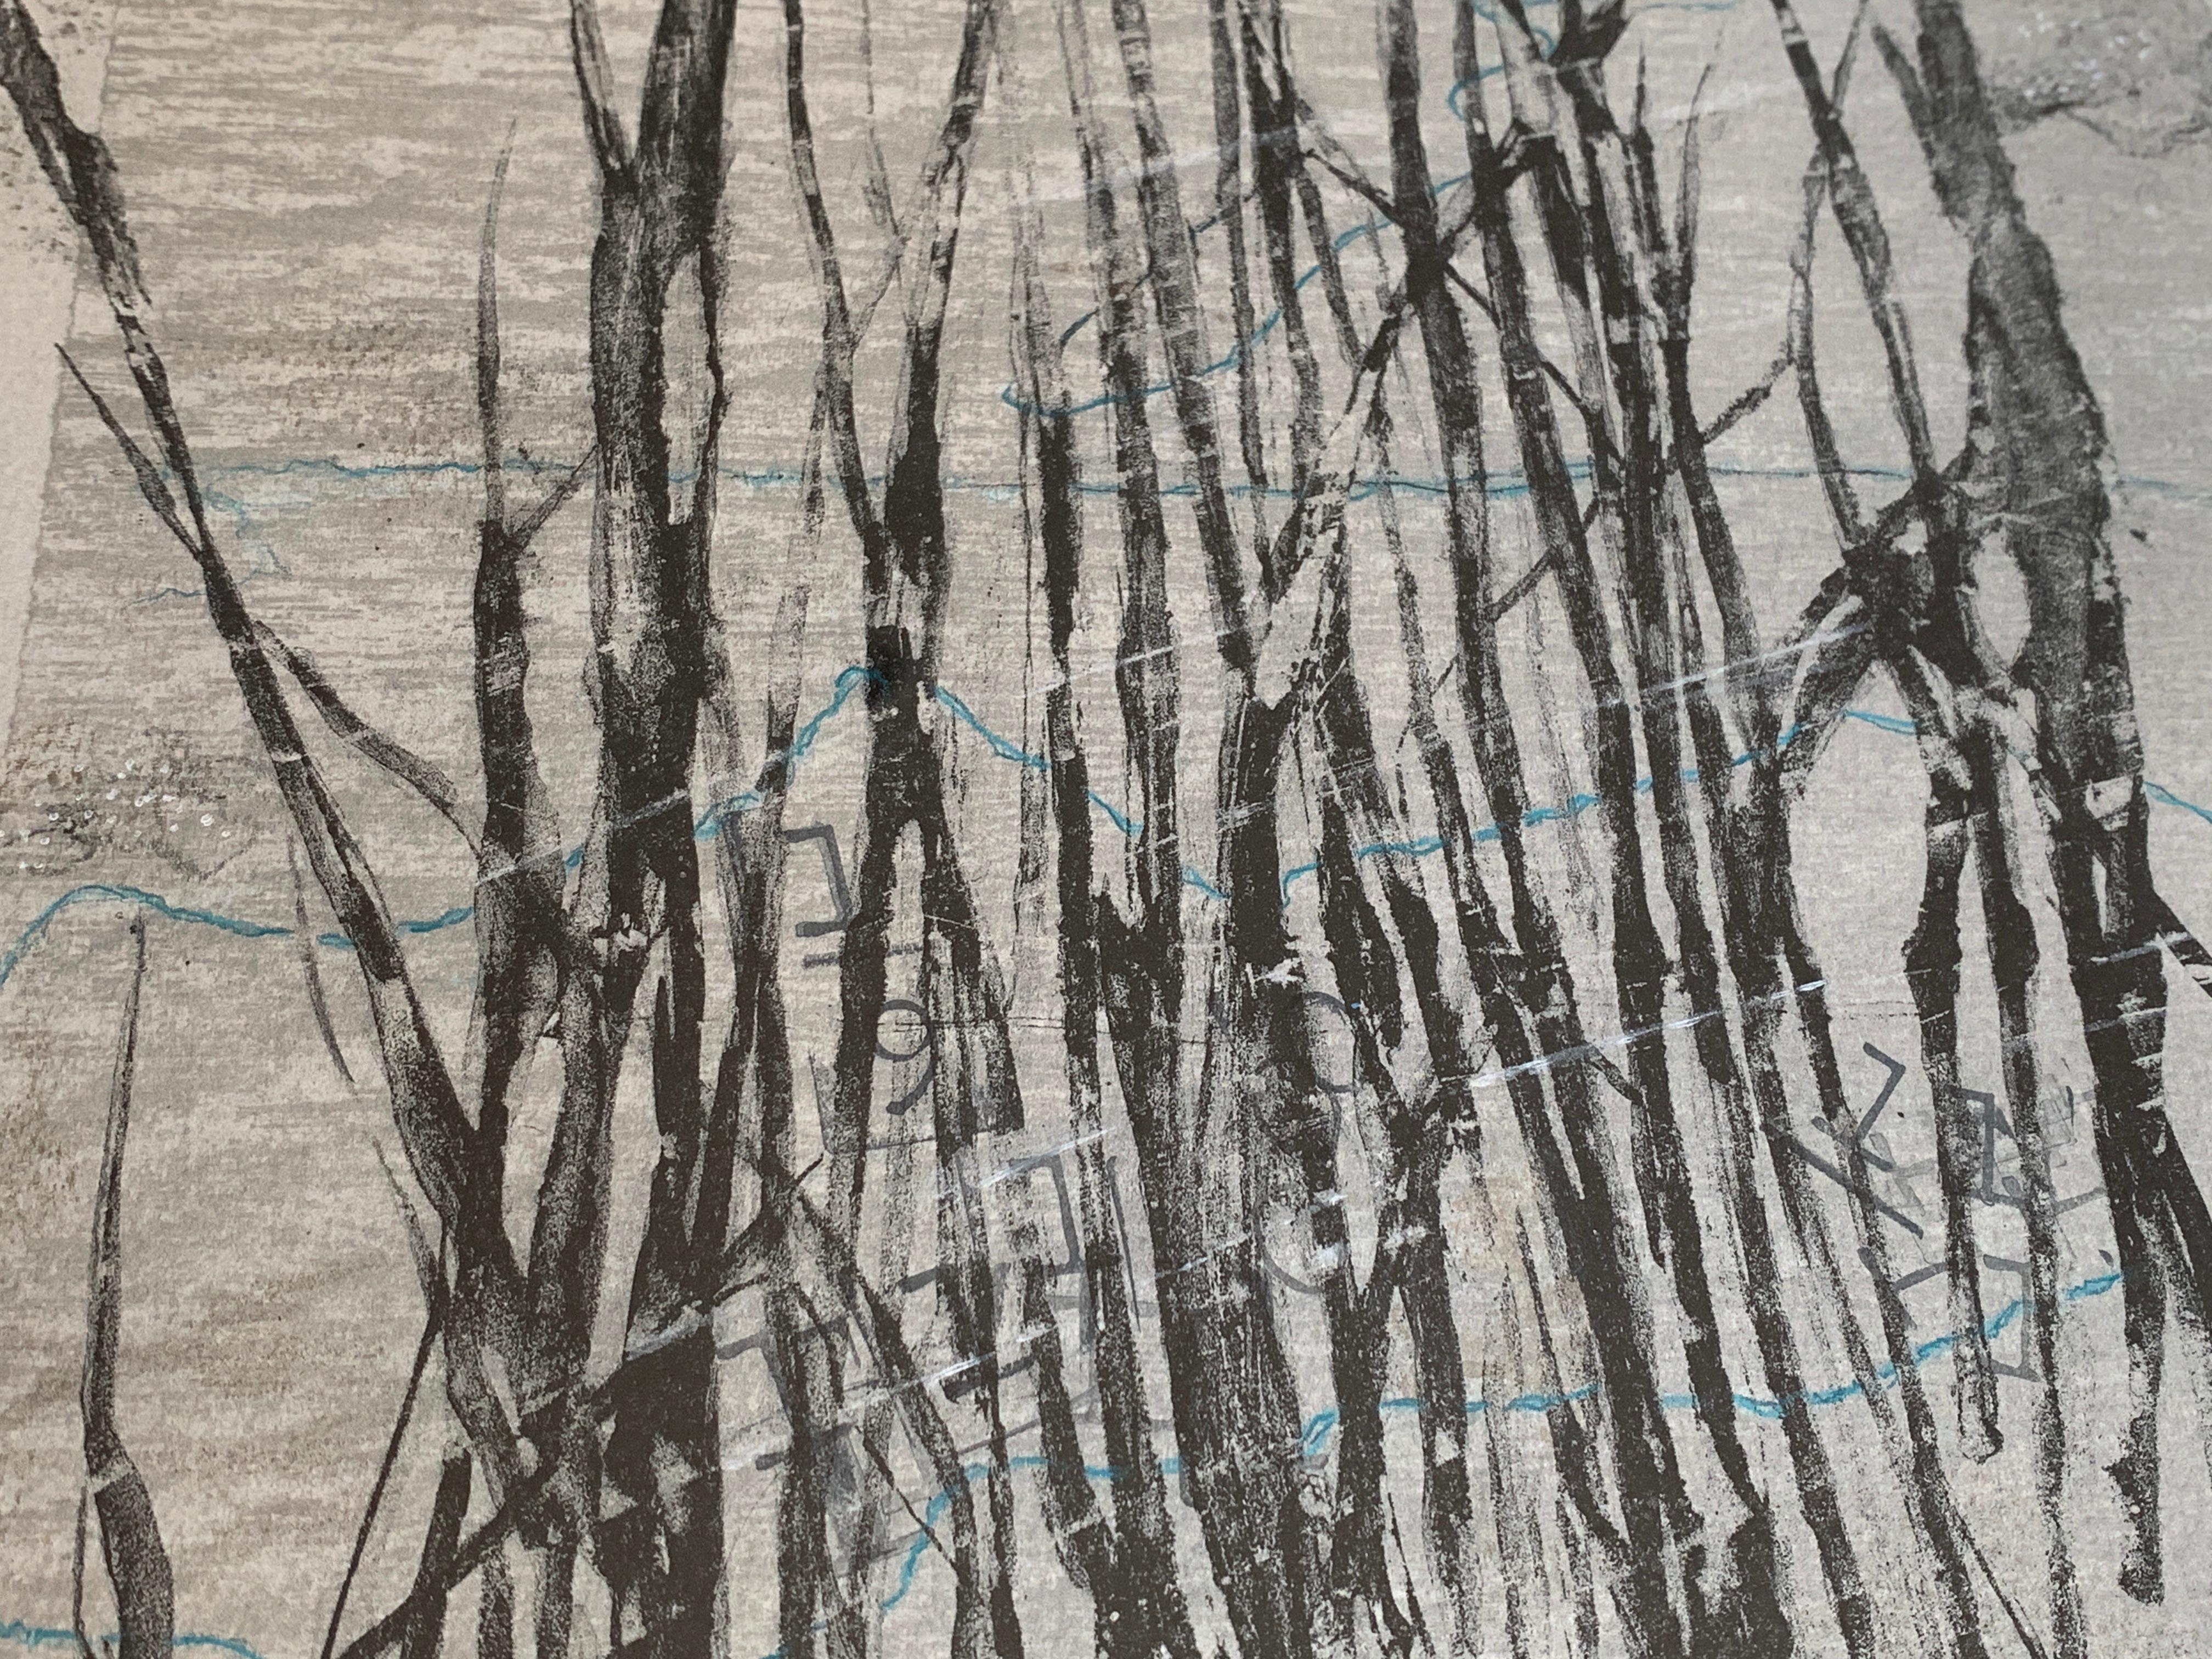 'Bog Grass' 1/4 Photolithograph Mixed-Media by Laurie Carnohan, 2019 6